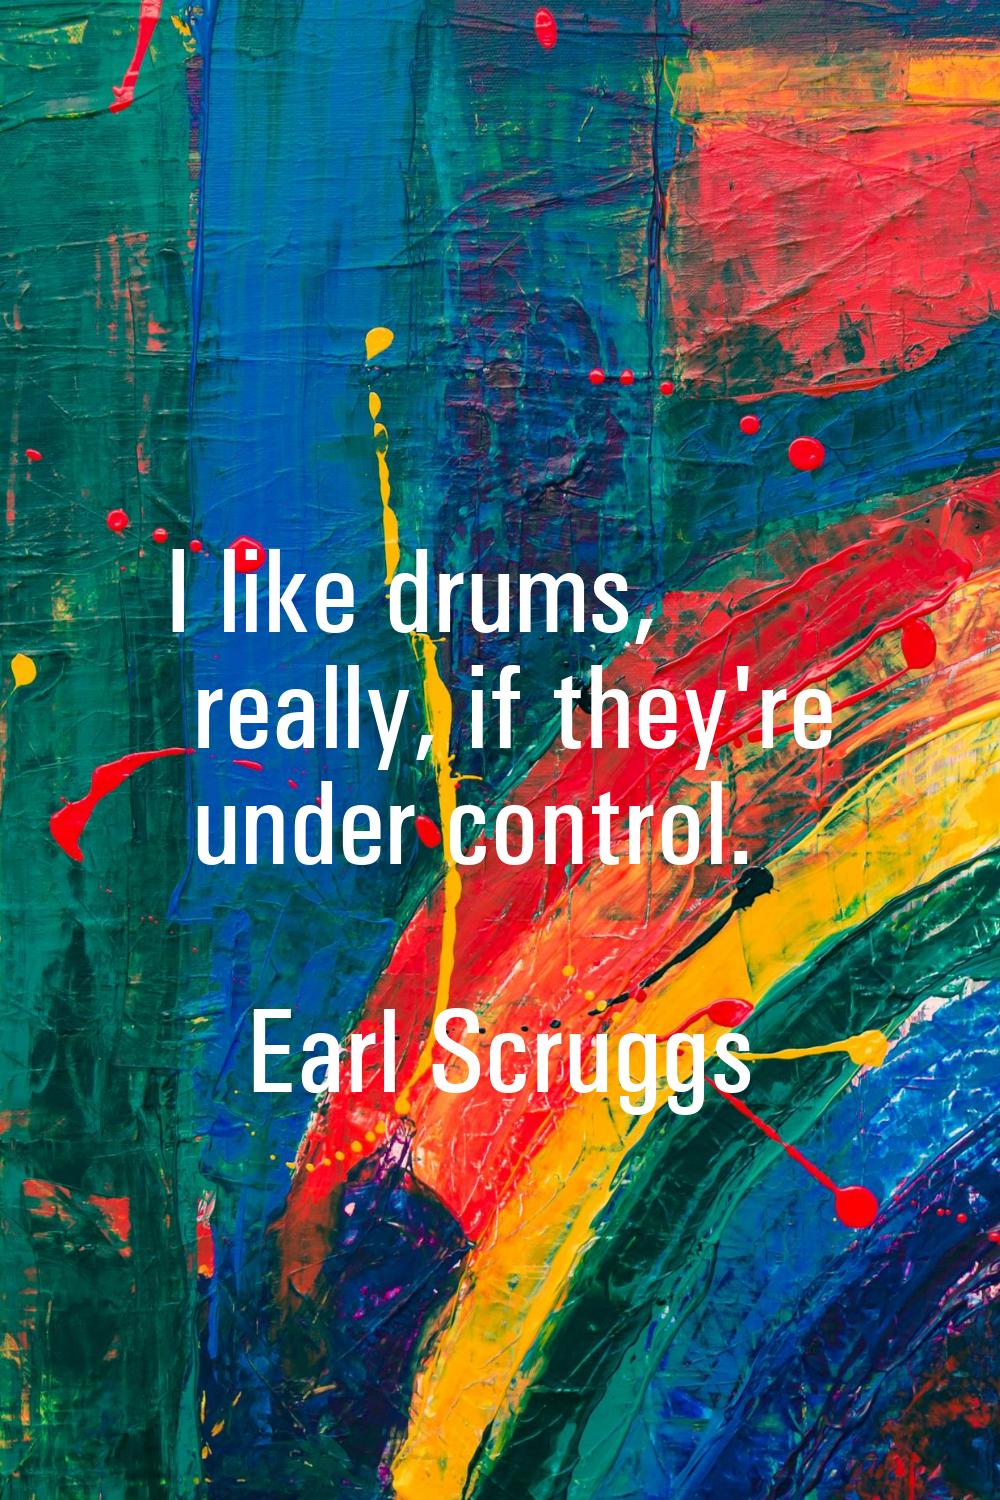 I like drums, really, if they're under control.